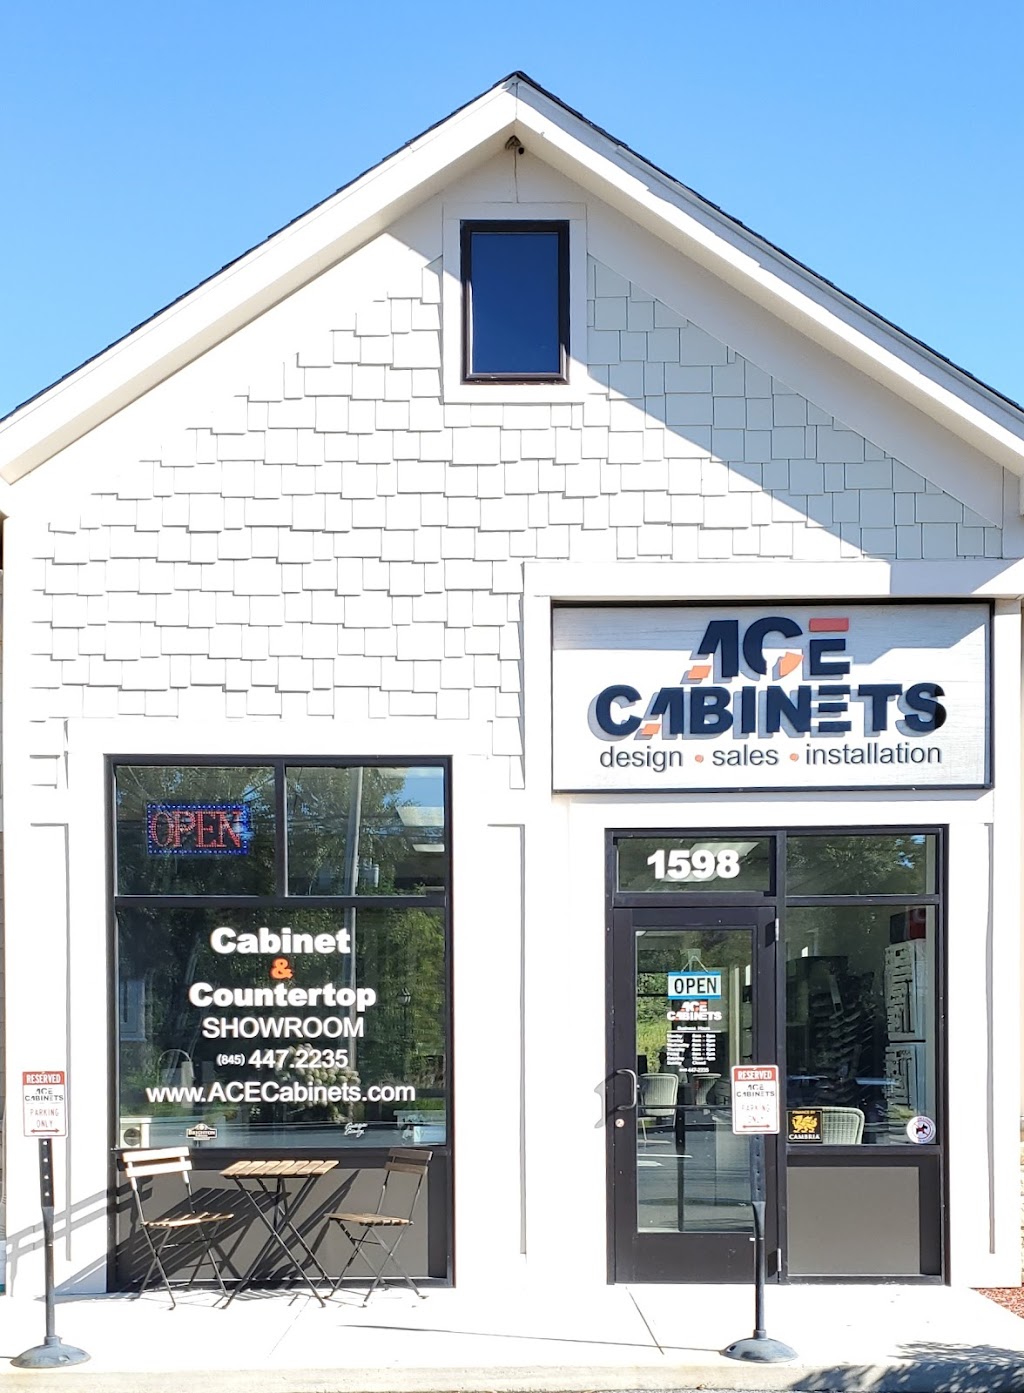 ACE Cabinets & Design | 1598 NY-82 Suite #2, Hopewell Junction, NY 12533 | Phone: (845) 447-2235